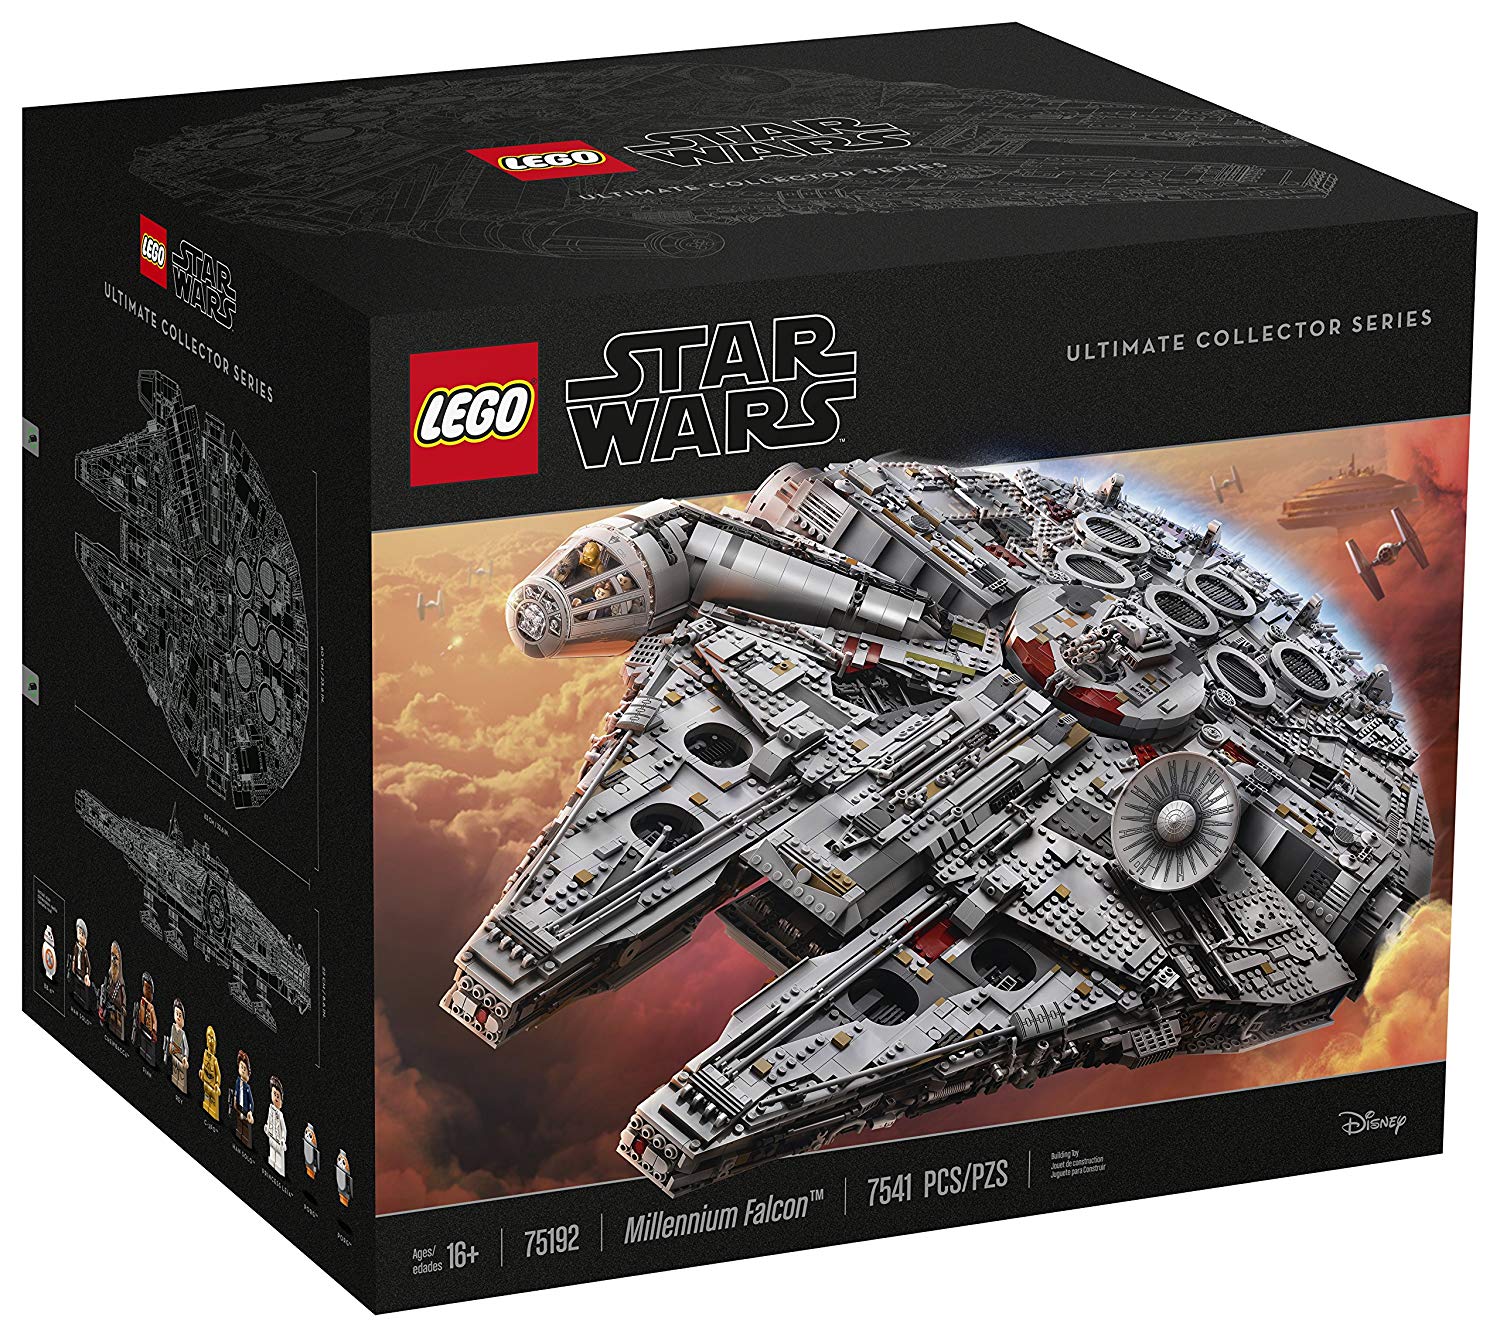 Amazon Upcoming Black Friday 2019 Deal – LEGO Star Wars Ultimate Millennium Falcon (75192) 40% Off - $480